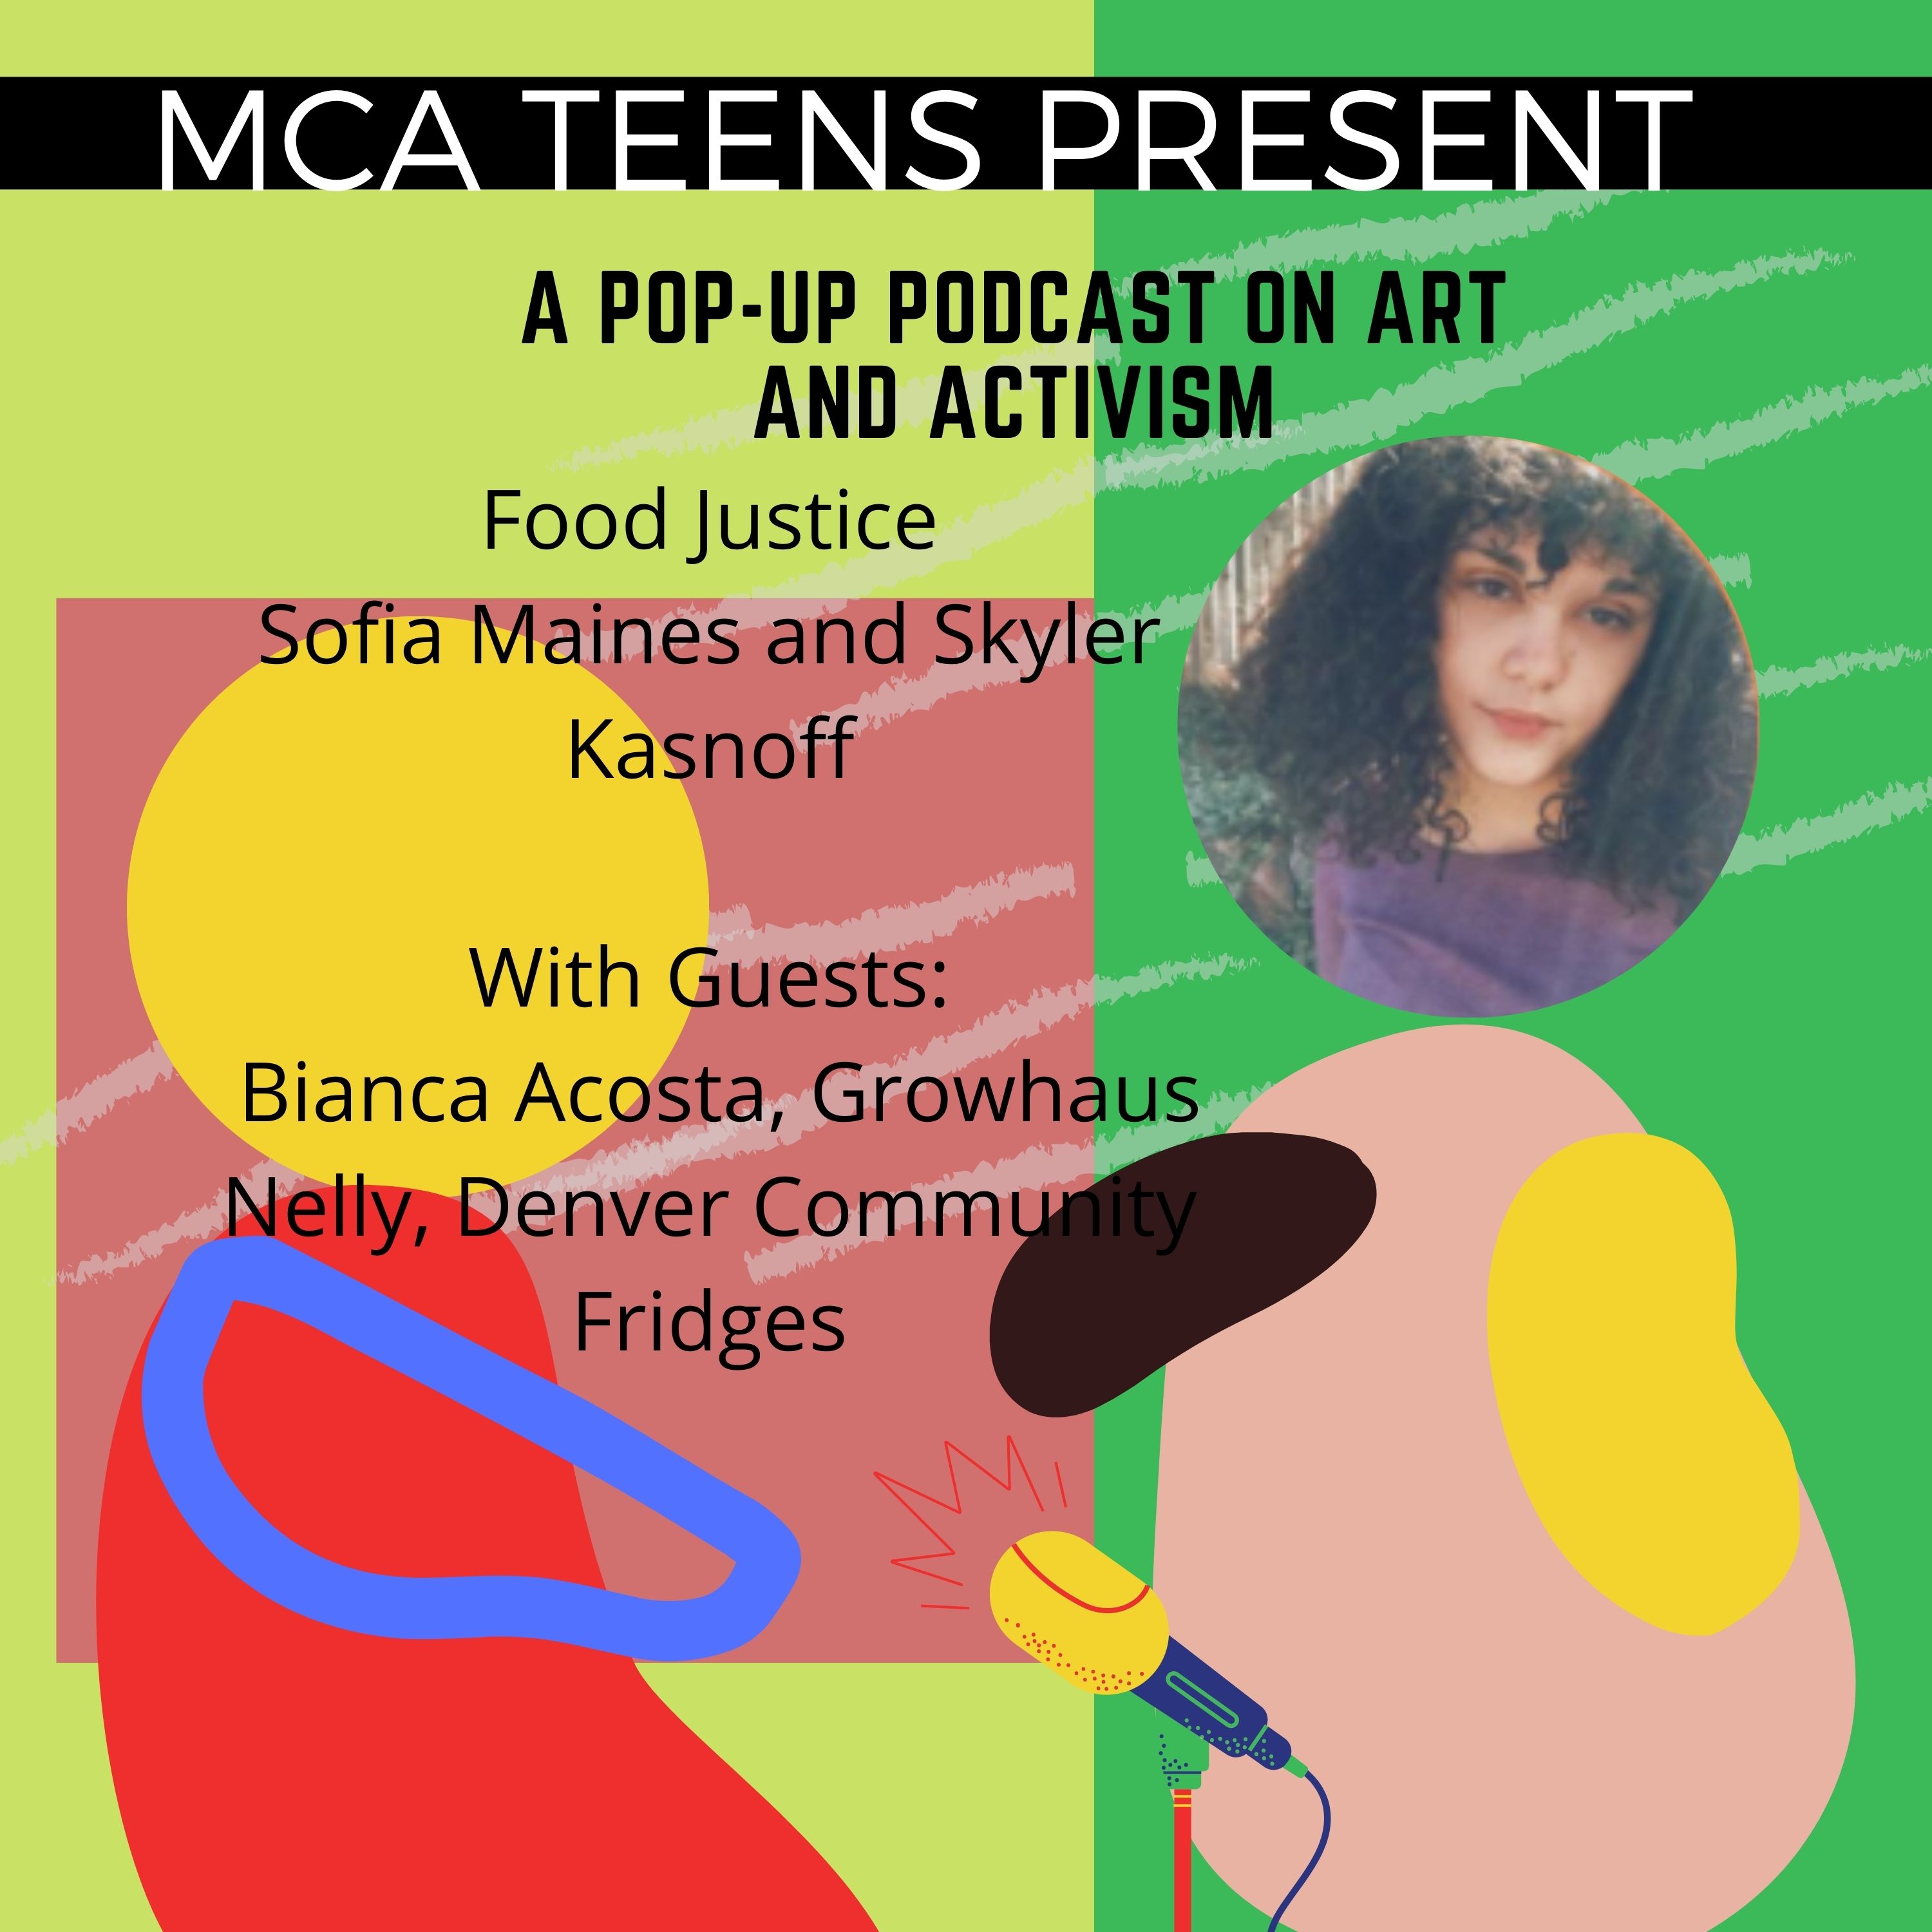 MCA Teens present a pop-up podcast on art and activism. Food Justice by Sofia Maines and Skyler Kasnoff. With guests: Bianca Acosta, Growhaus and Netty Rodriguez Arauz, Denver Community Fridges